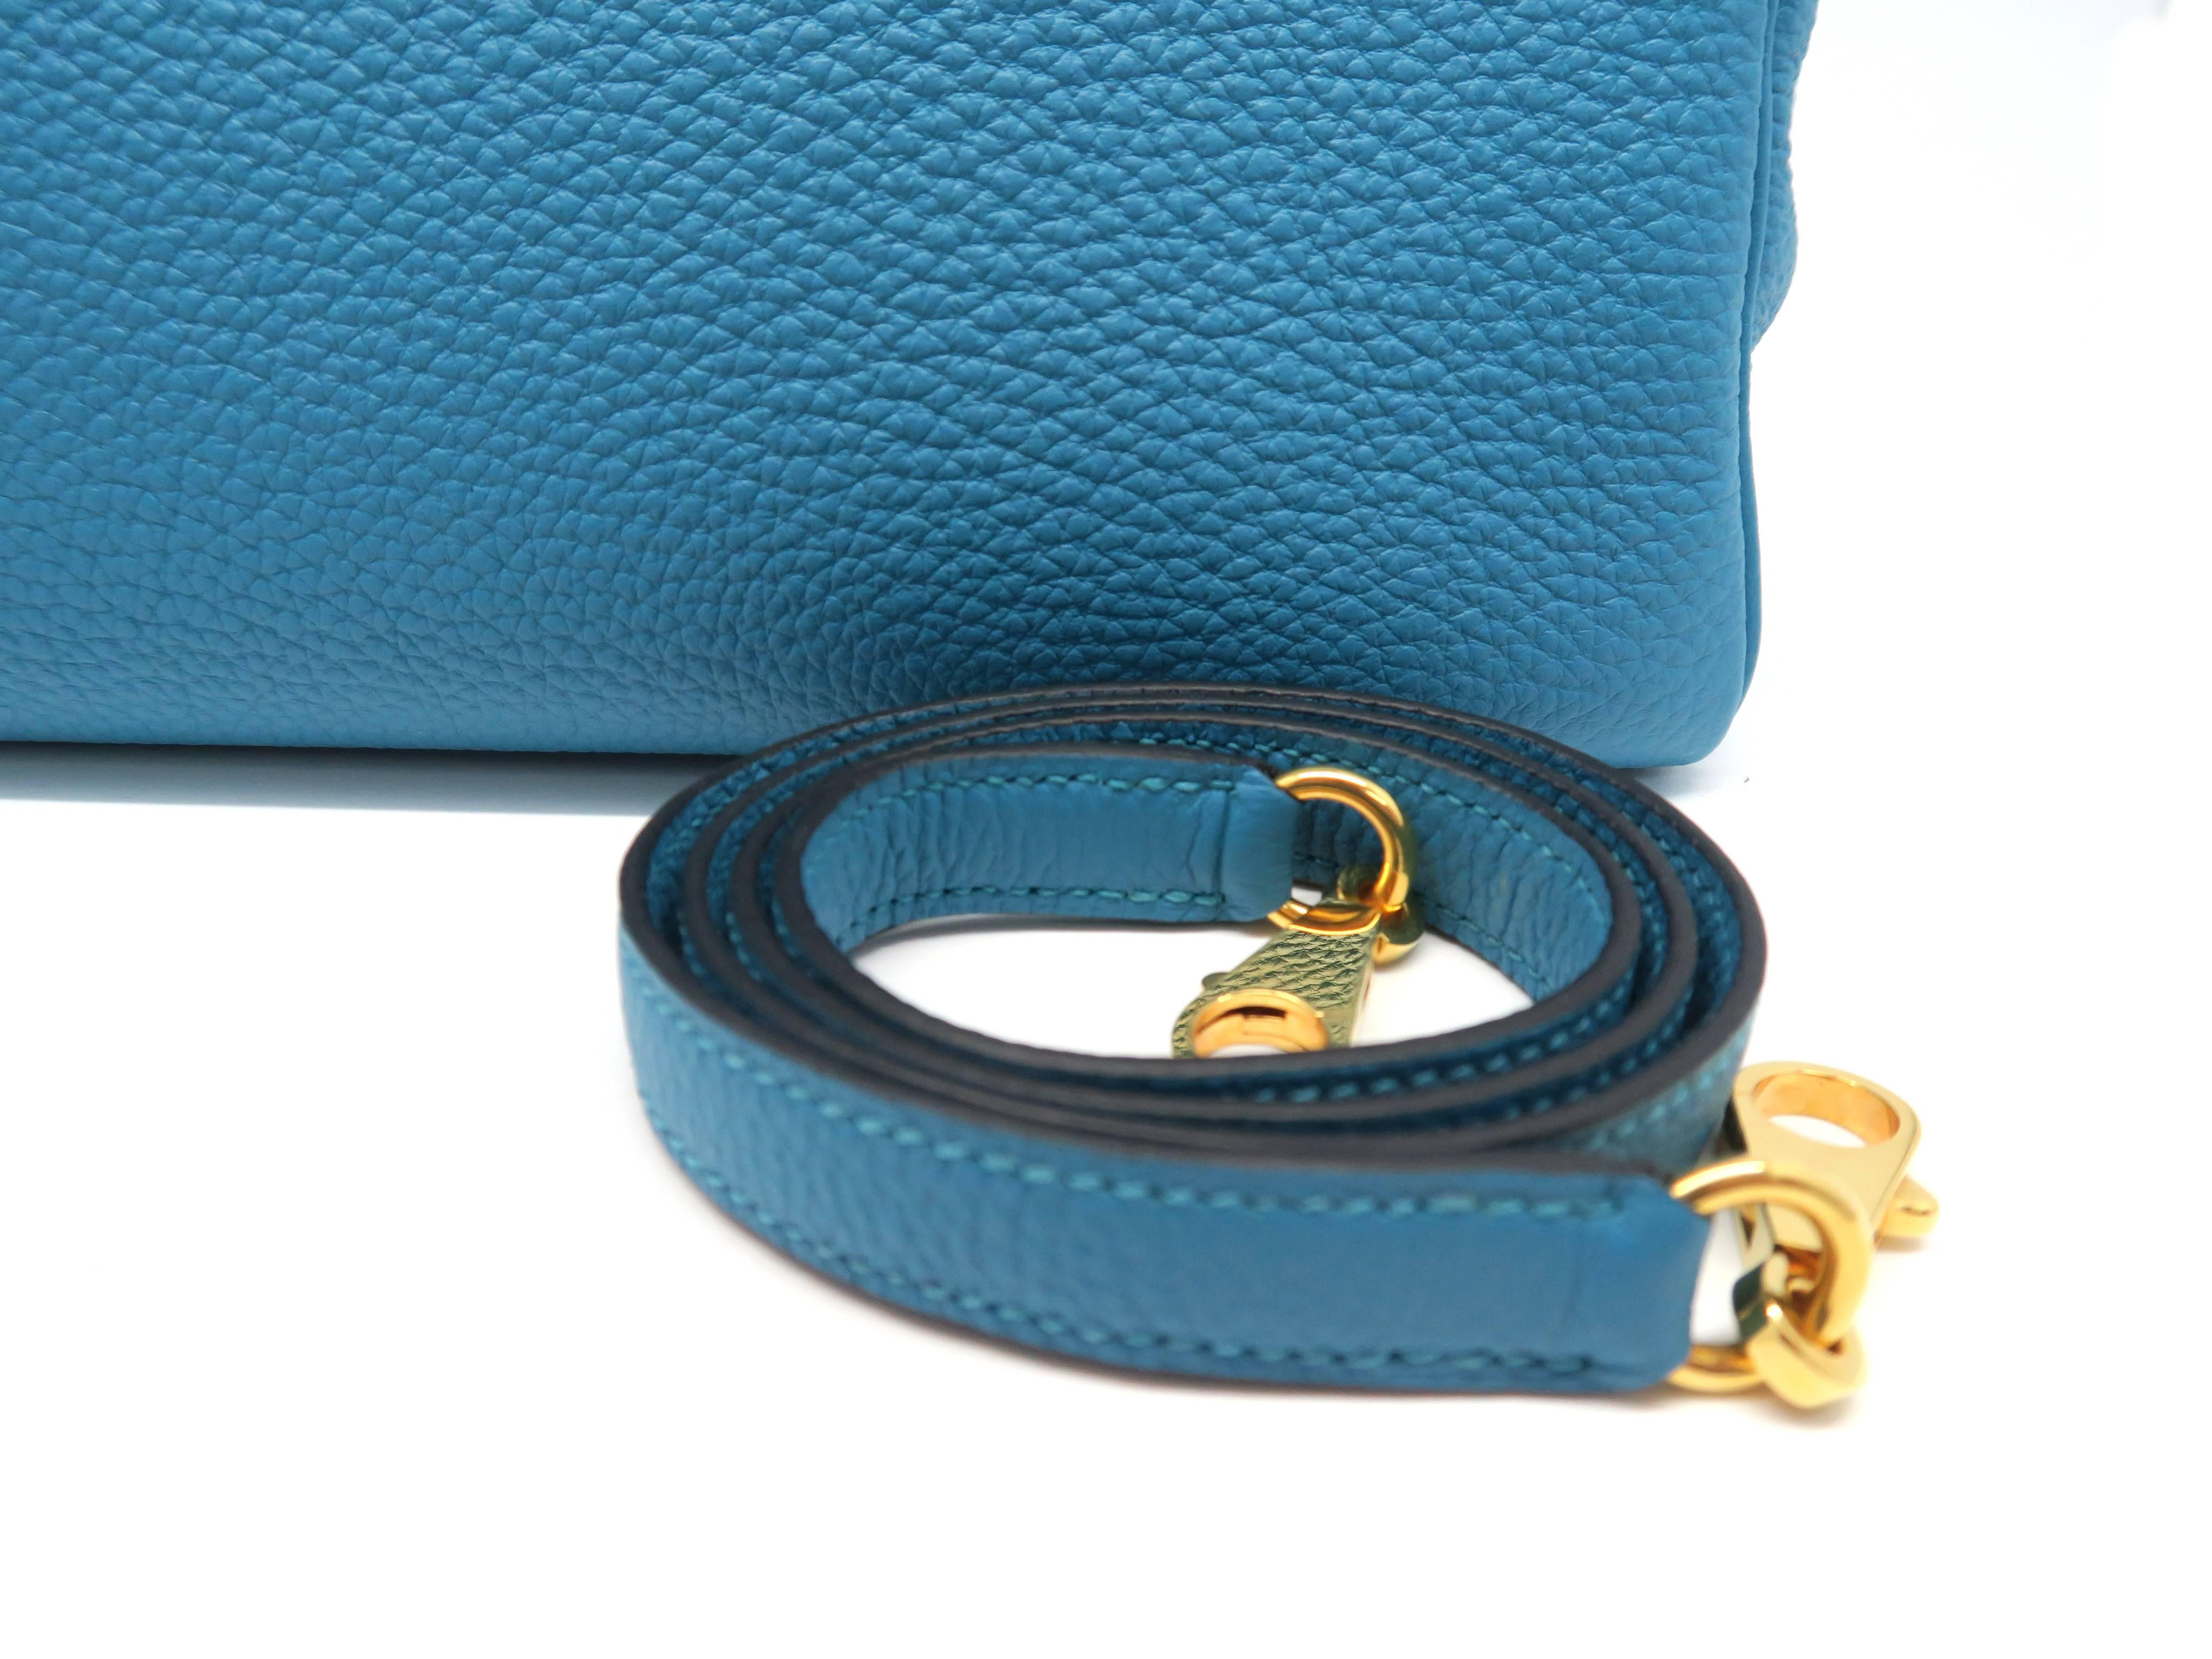 Hermes Kelly 28 Turquoise Blue Togo Leather Gold Metal Top Handle Bag 3